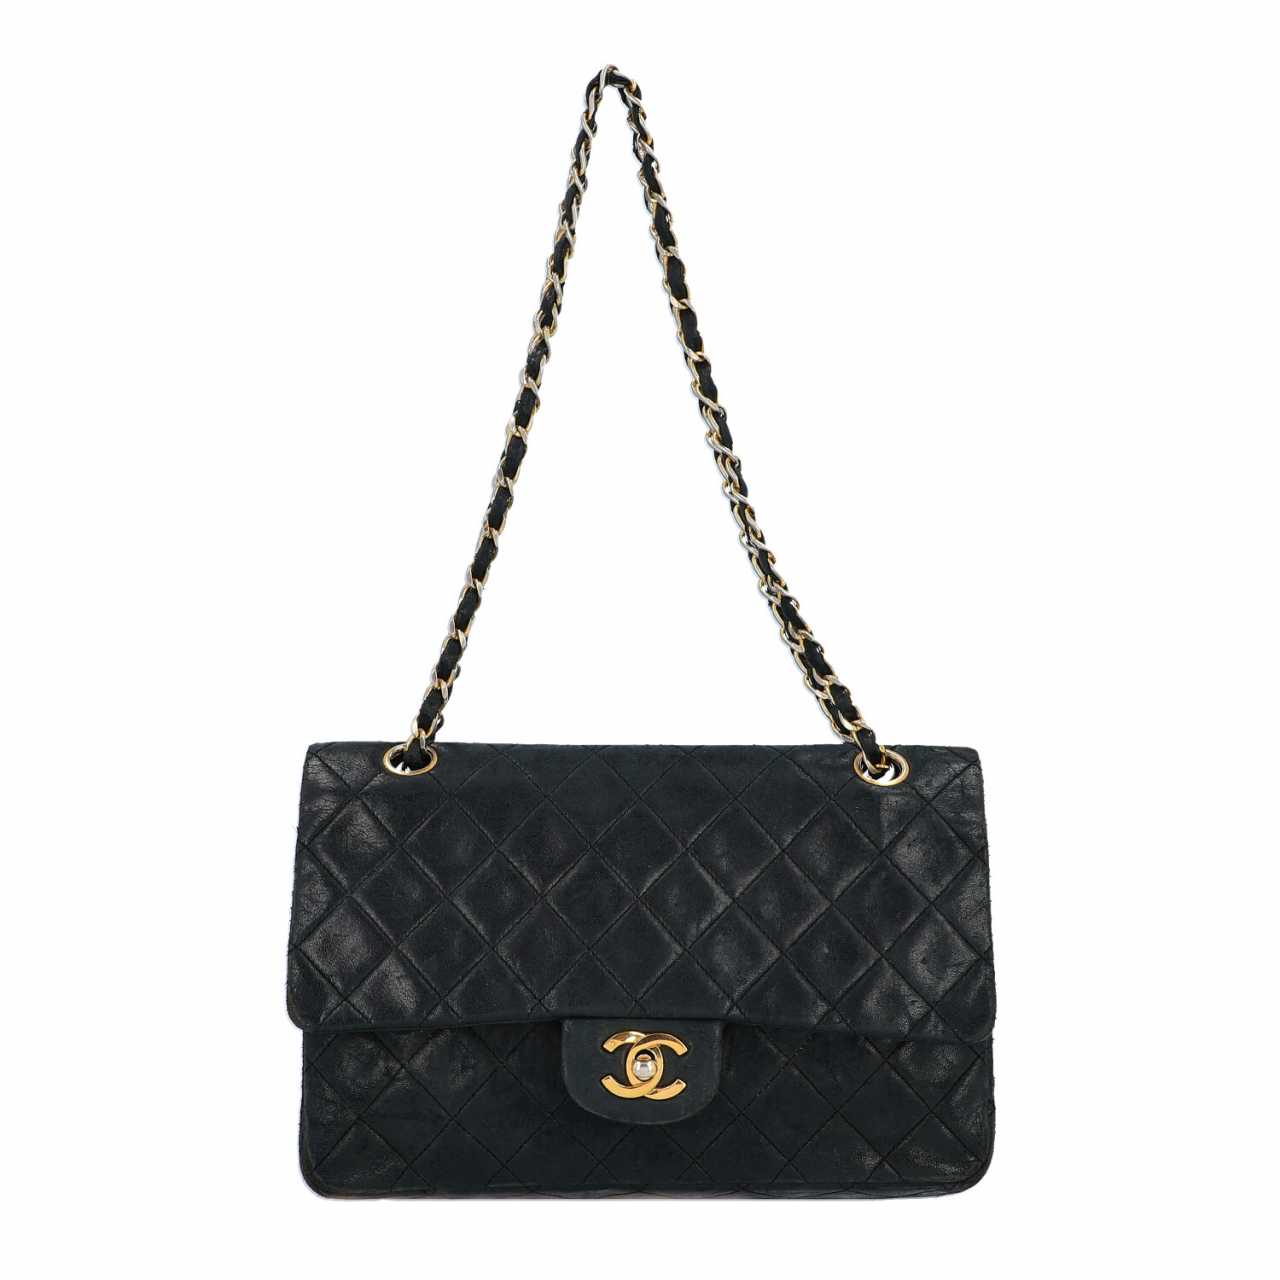 Chanel Bag 2 55 Double Flap Collection 1980 1990 New Price 4 250 Buy At Online Auction At Veryimportantlot Com Auction Catalog Luxury Private Property Jewelry Fashion Luxury Accessories From 14 09 19 Photo Price Auction Lot 71